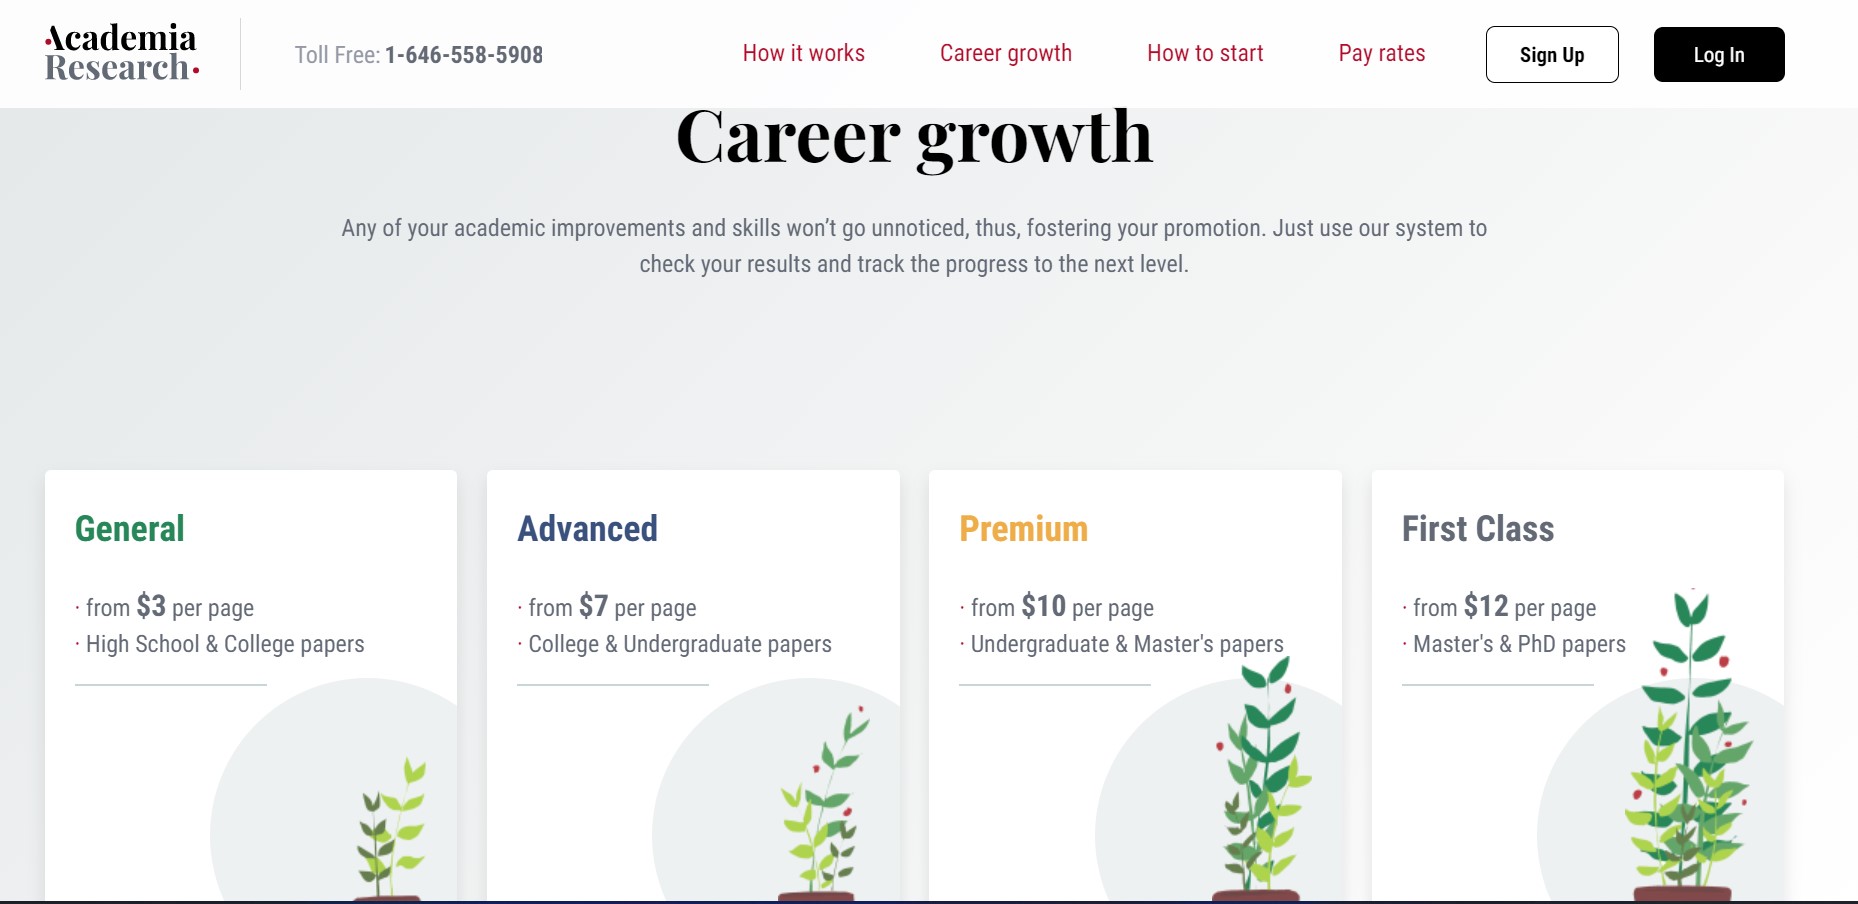 Academia Research career growth